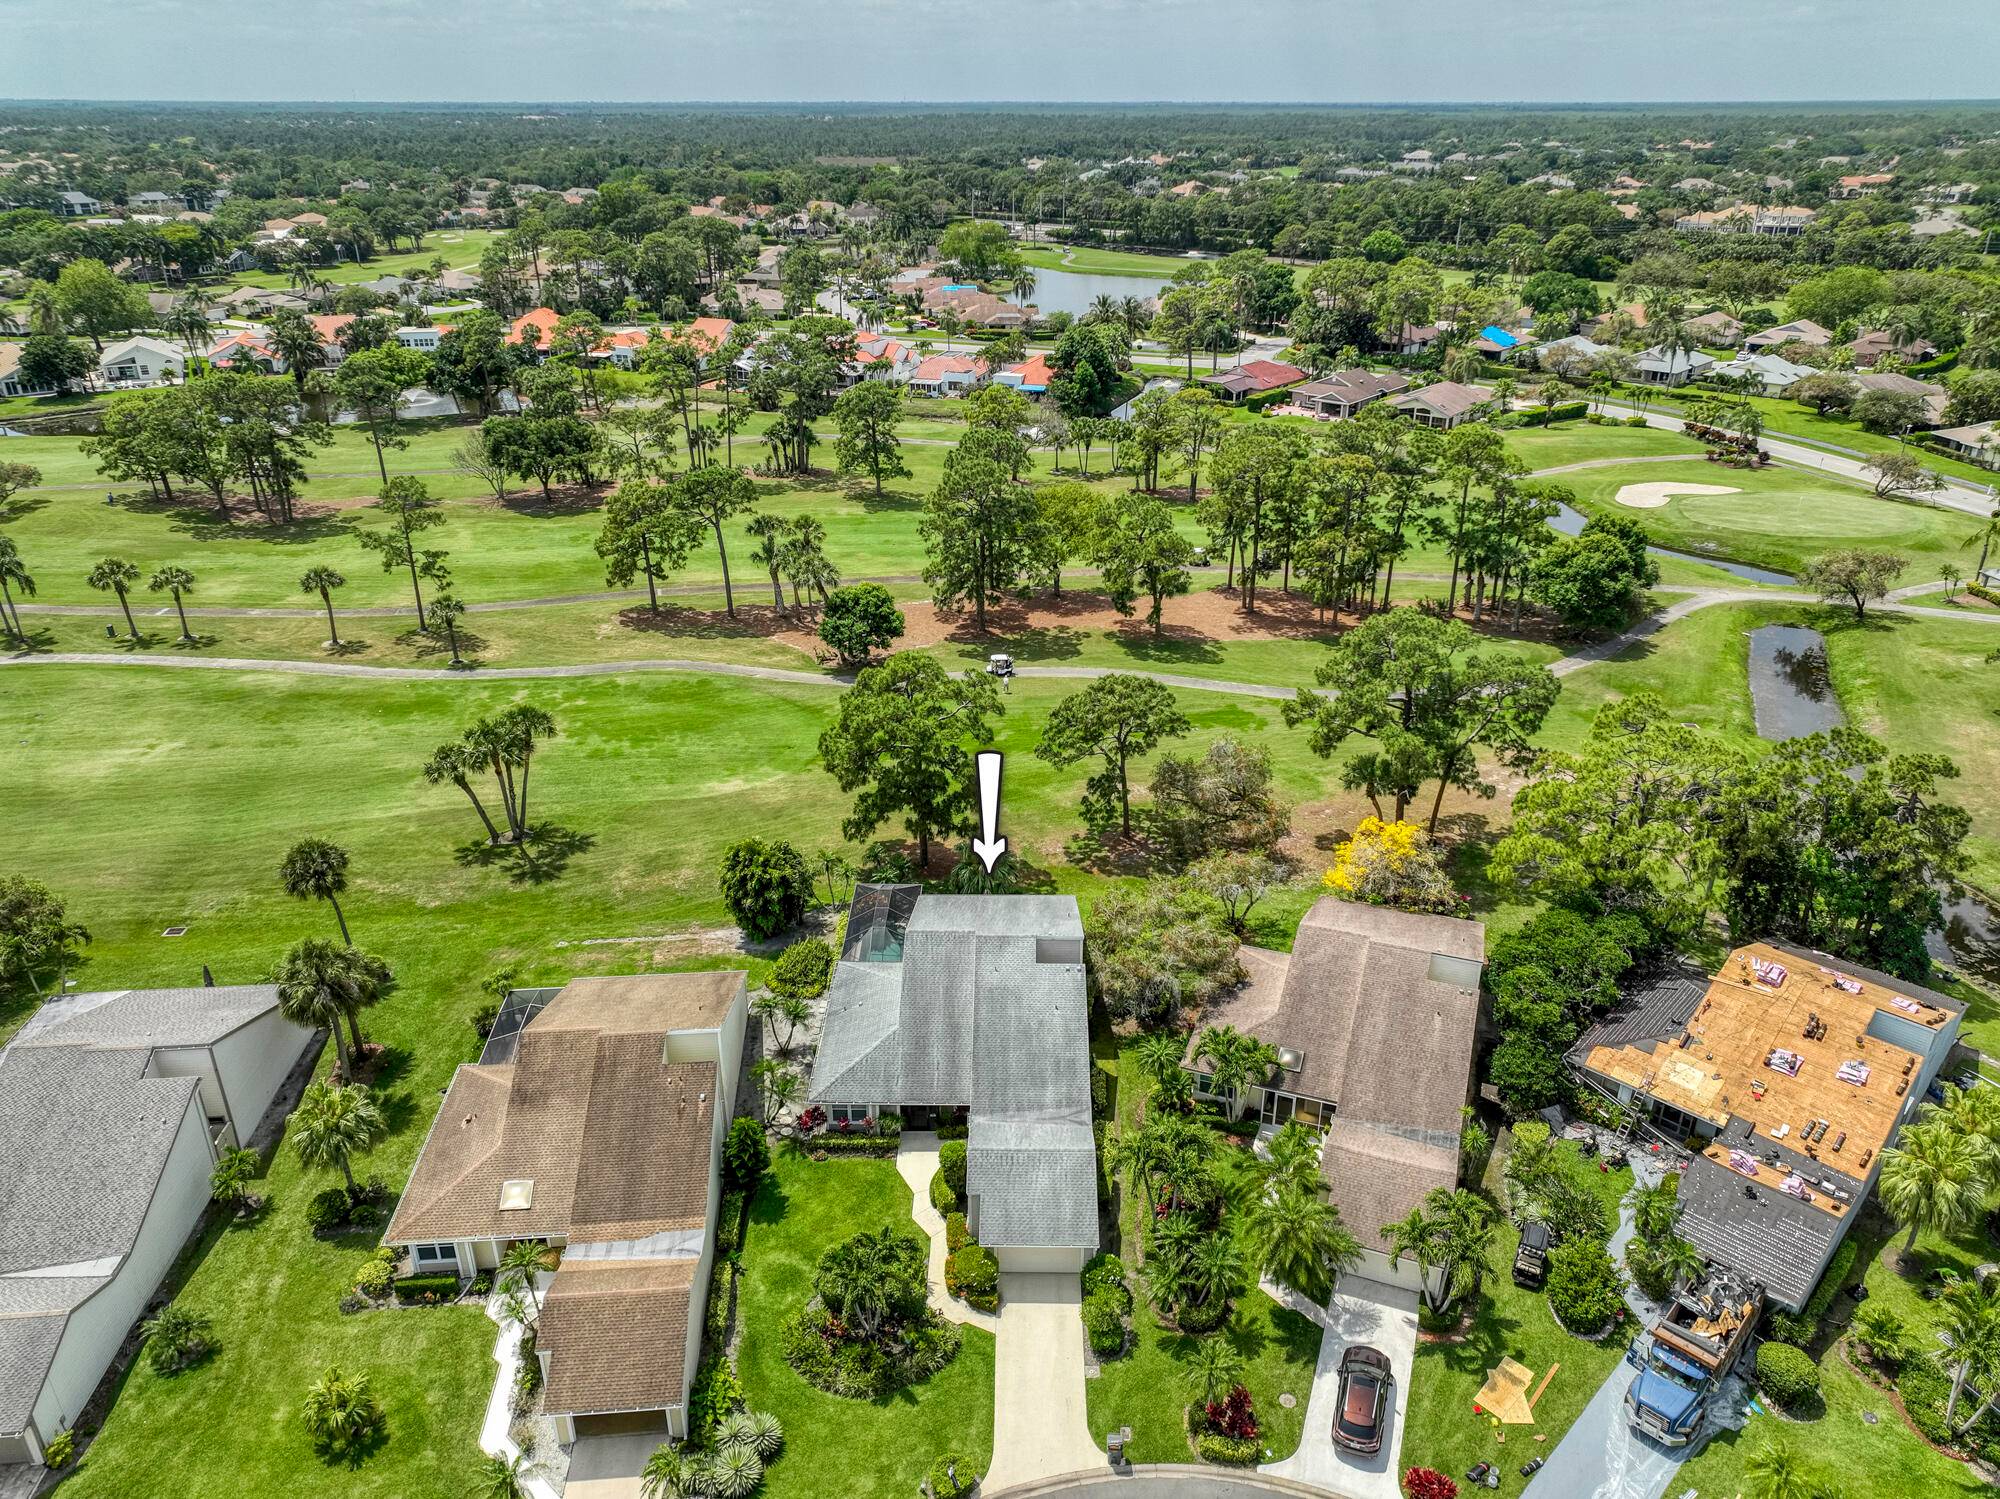 Centrally located and on a cul de sac this bright home welcomes you with an open floor plan, volume ceilings, and spacious living areas overlooking the pool which offers golf ...